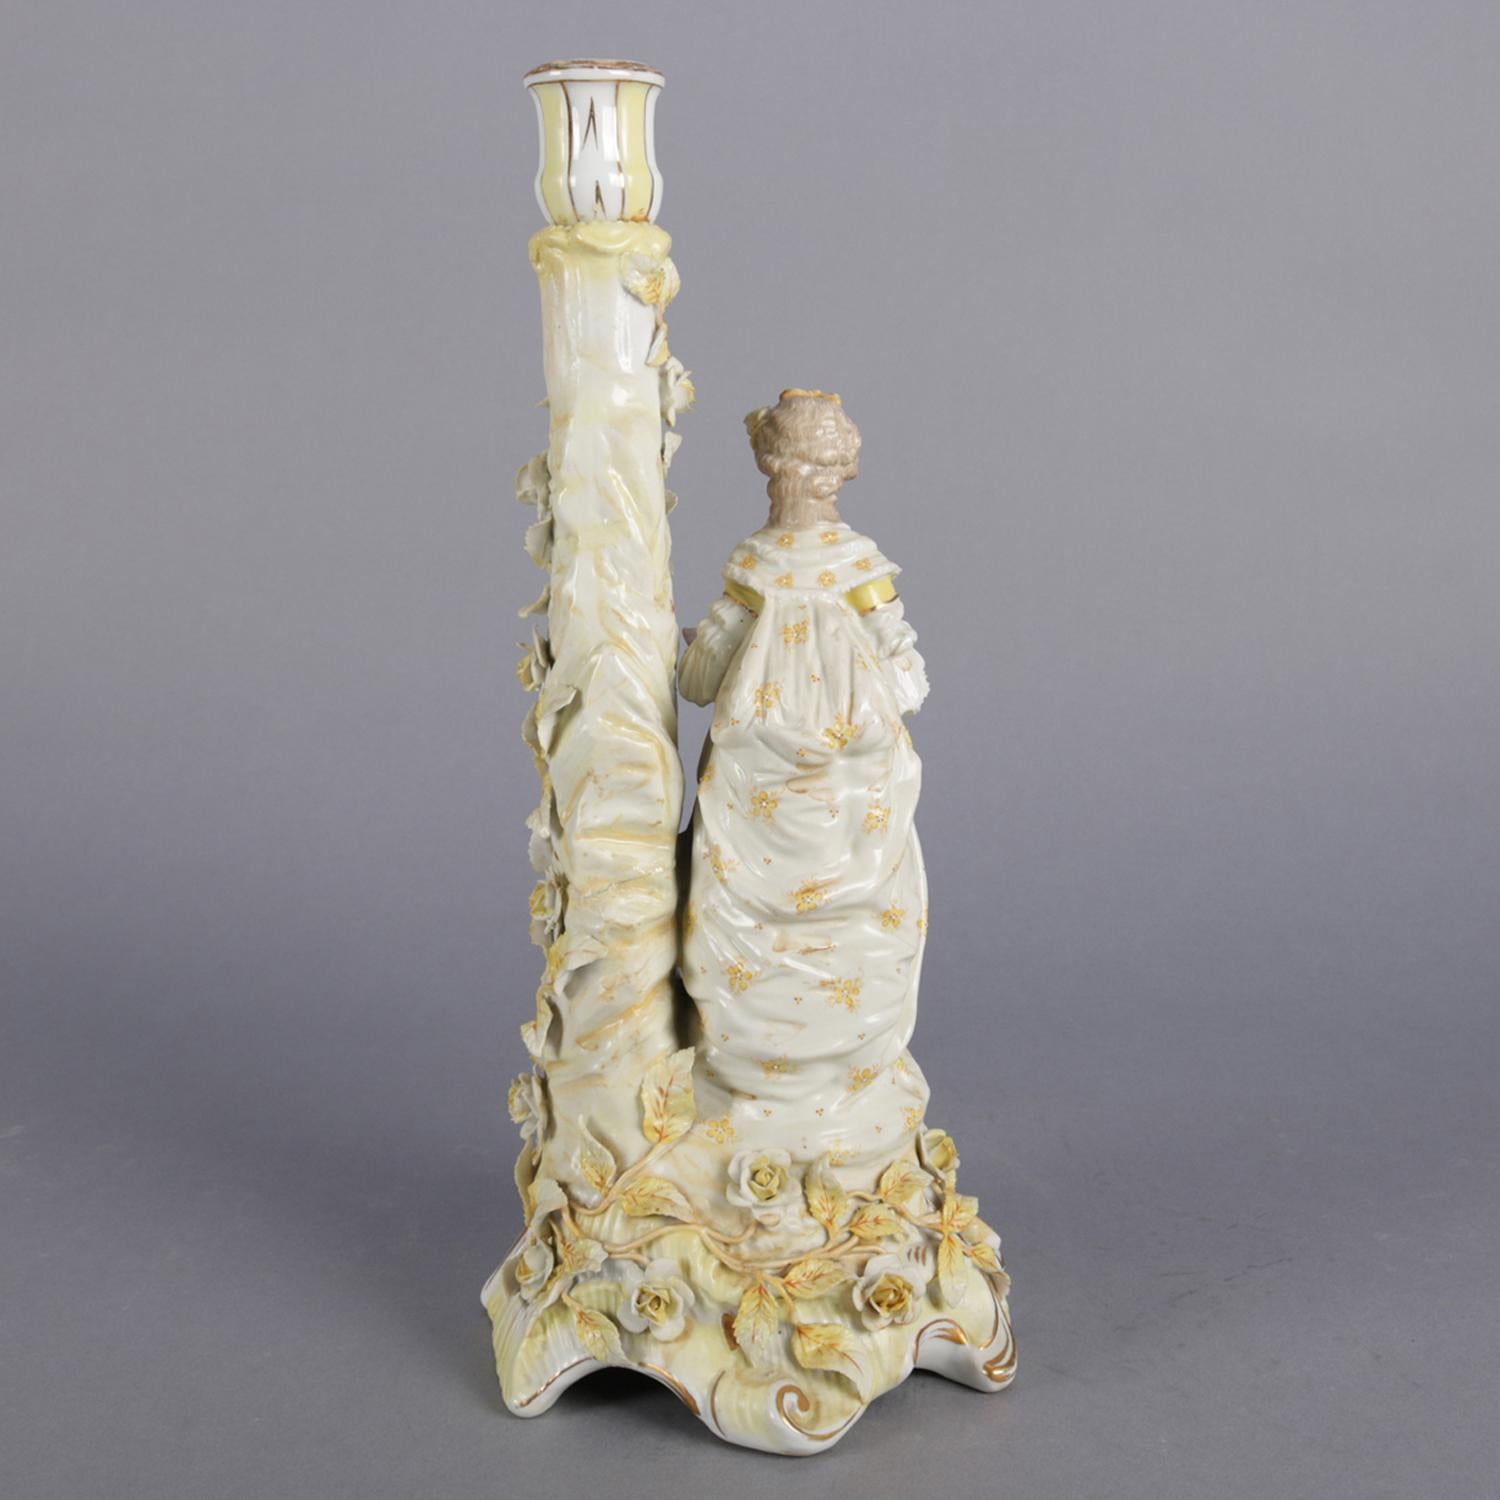 19th Century Antique German Meissen Hand Painted and Gilt Figural Porcelain Candlestick For Sale